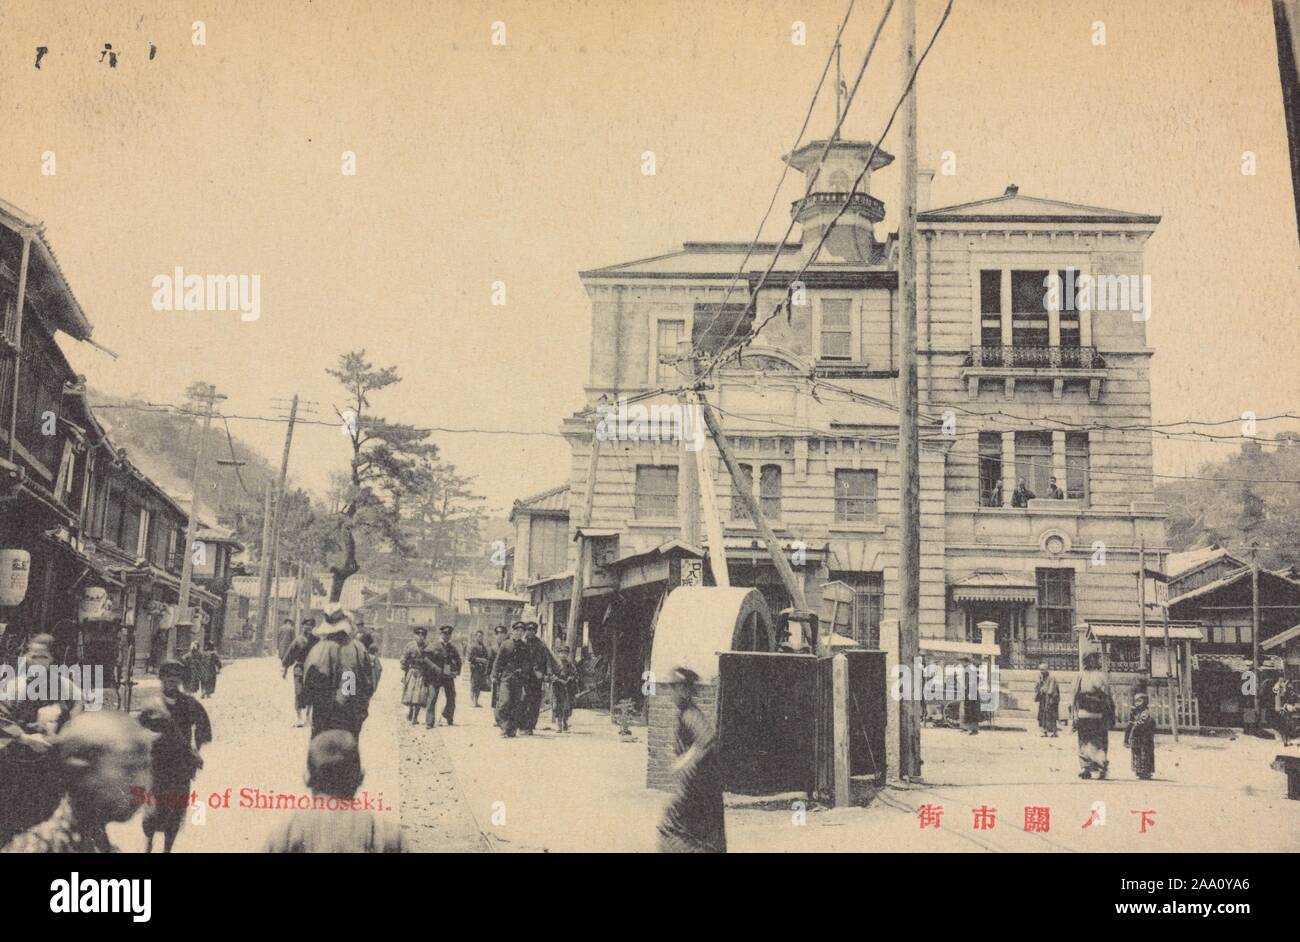 Monochrome postcard of a busy street in the city of Shimonoseki, Yamaguchi Prefecture, Japan, 1905. From the New York Public Library. () Stock Photo